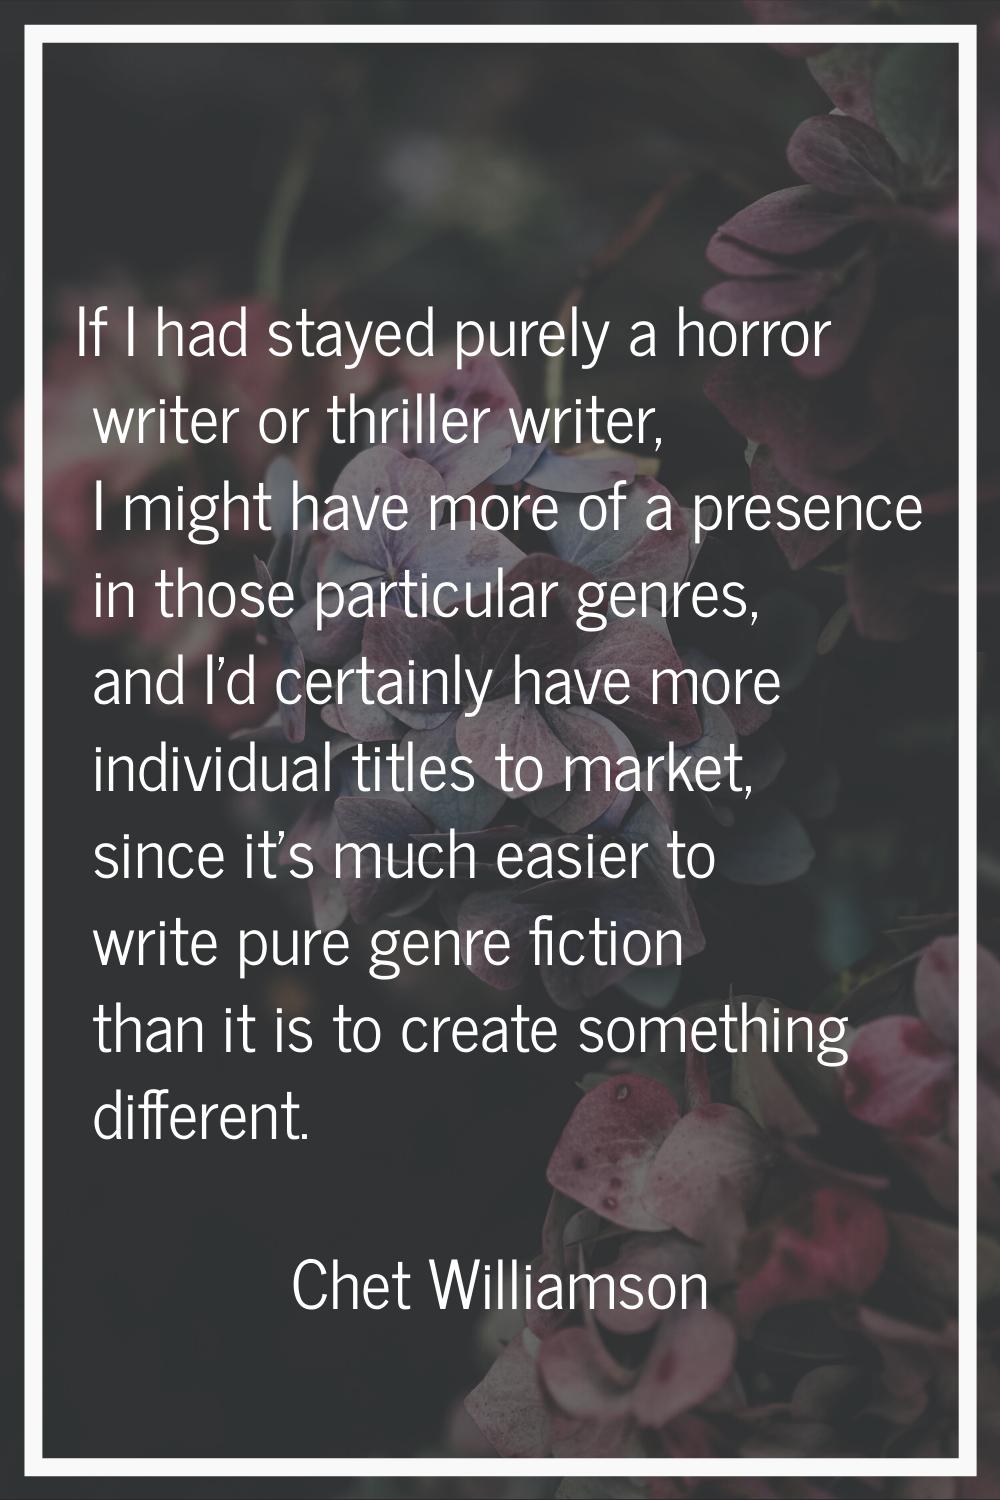 If I had stayed purely a horror writer or thriller writer, I might have more of a presence in those